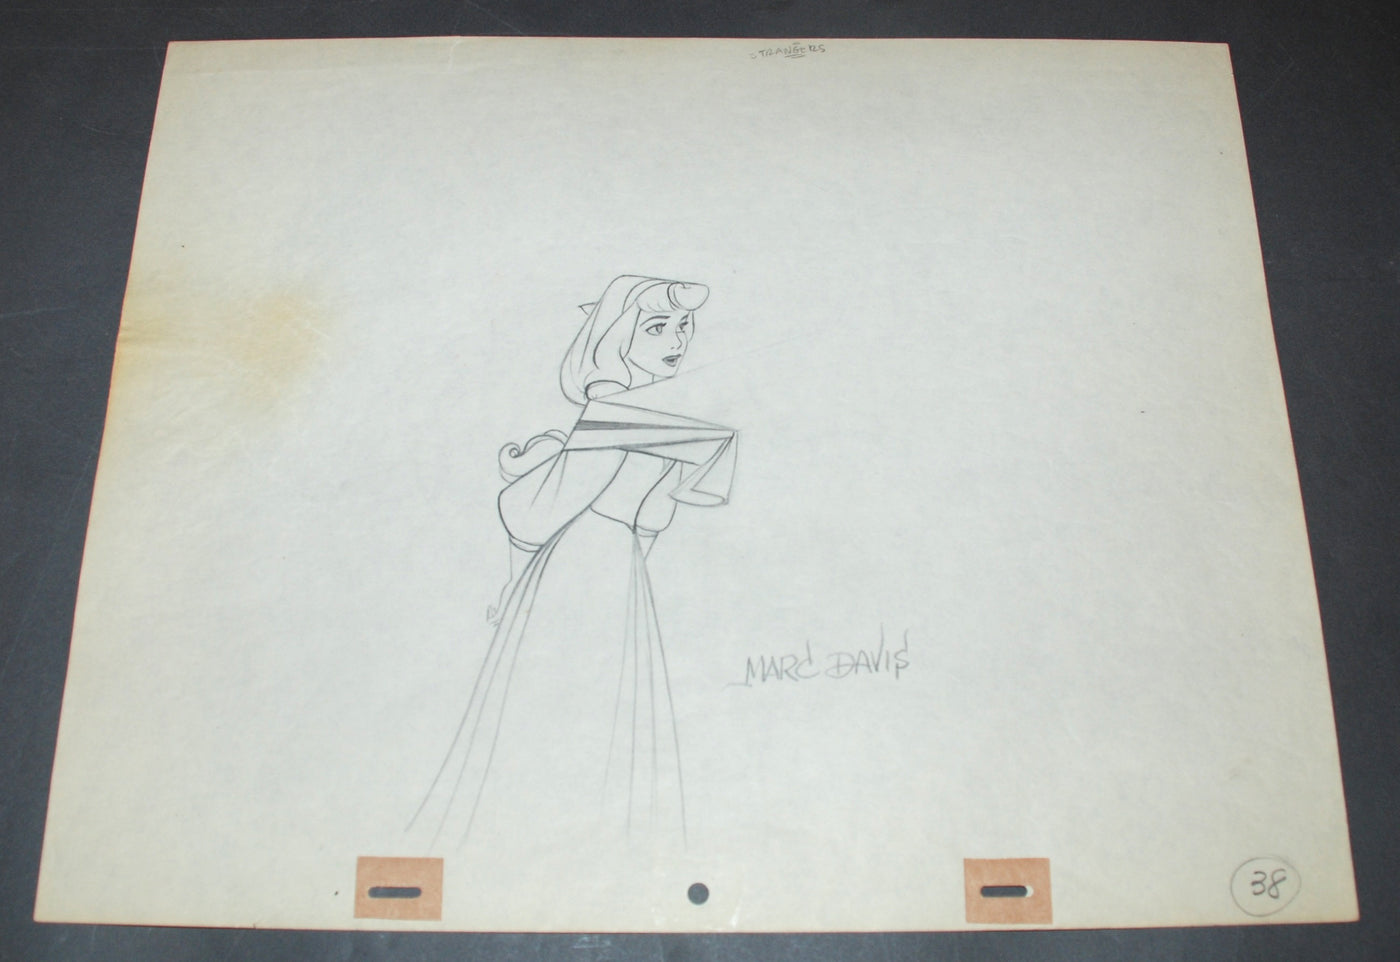 Original Walt Disney Production Drawing from Sleeping Beauty featuring Briar Rose, Signed by Marc Davis